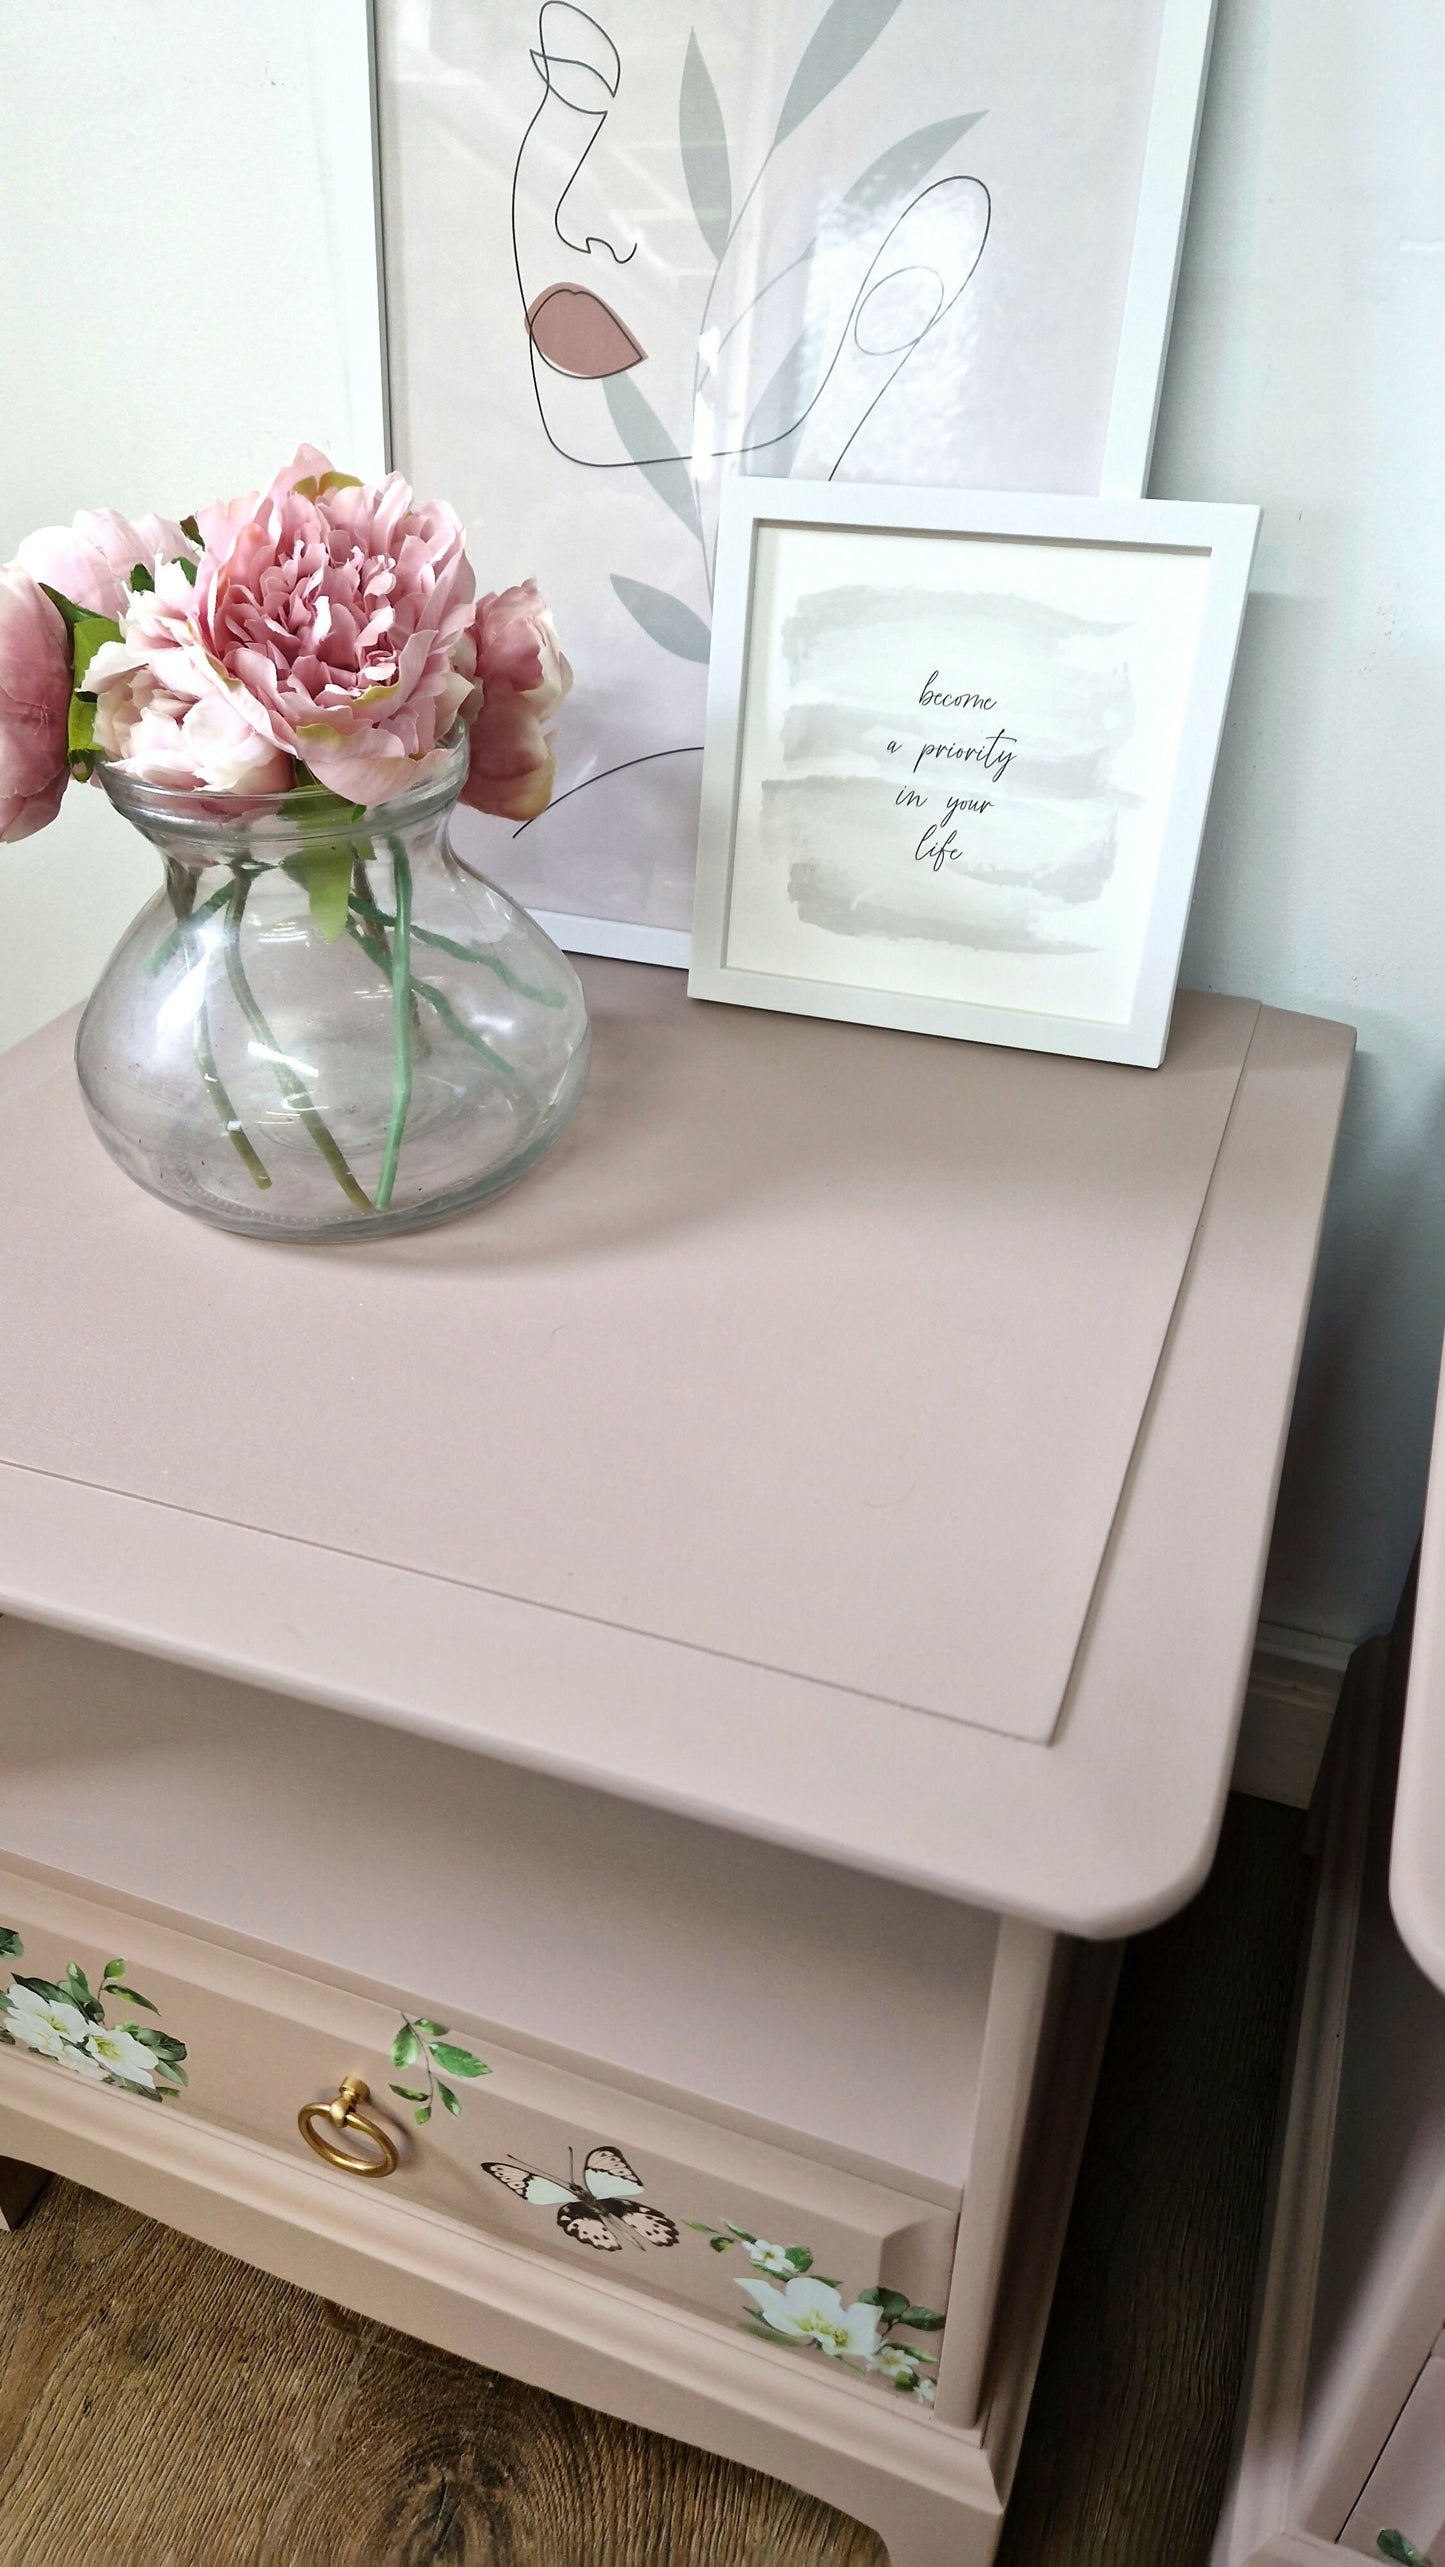 Stag pink trellis flowers bedside cabinets in pink